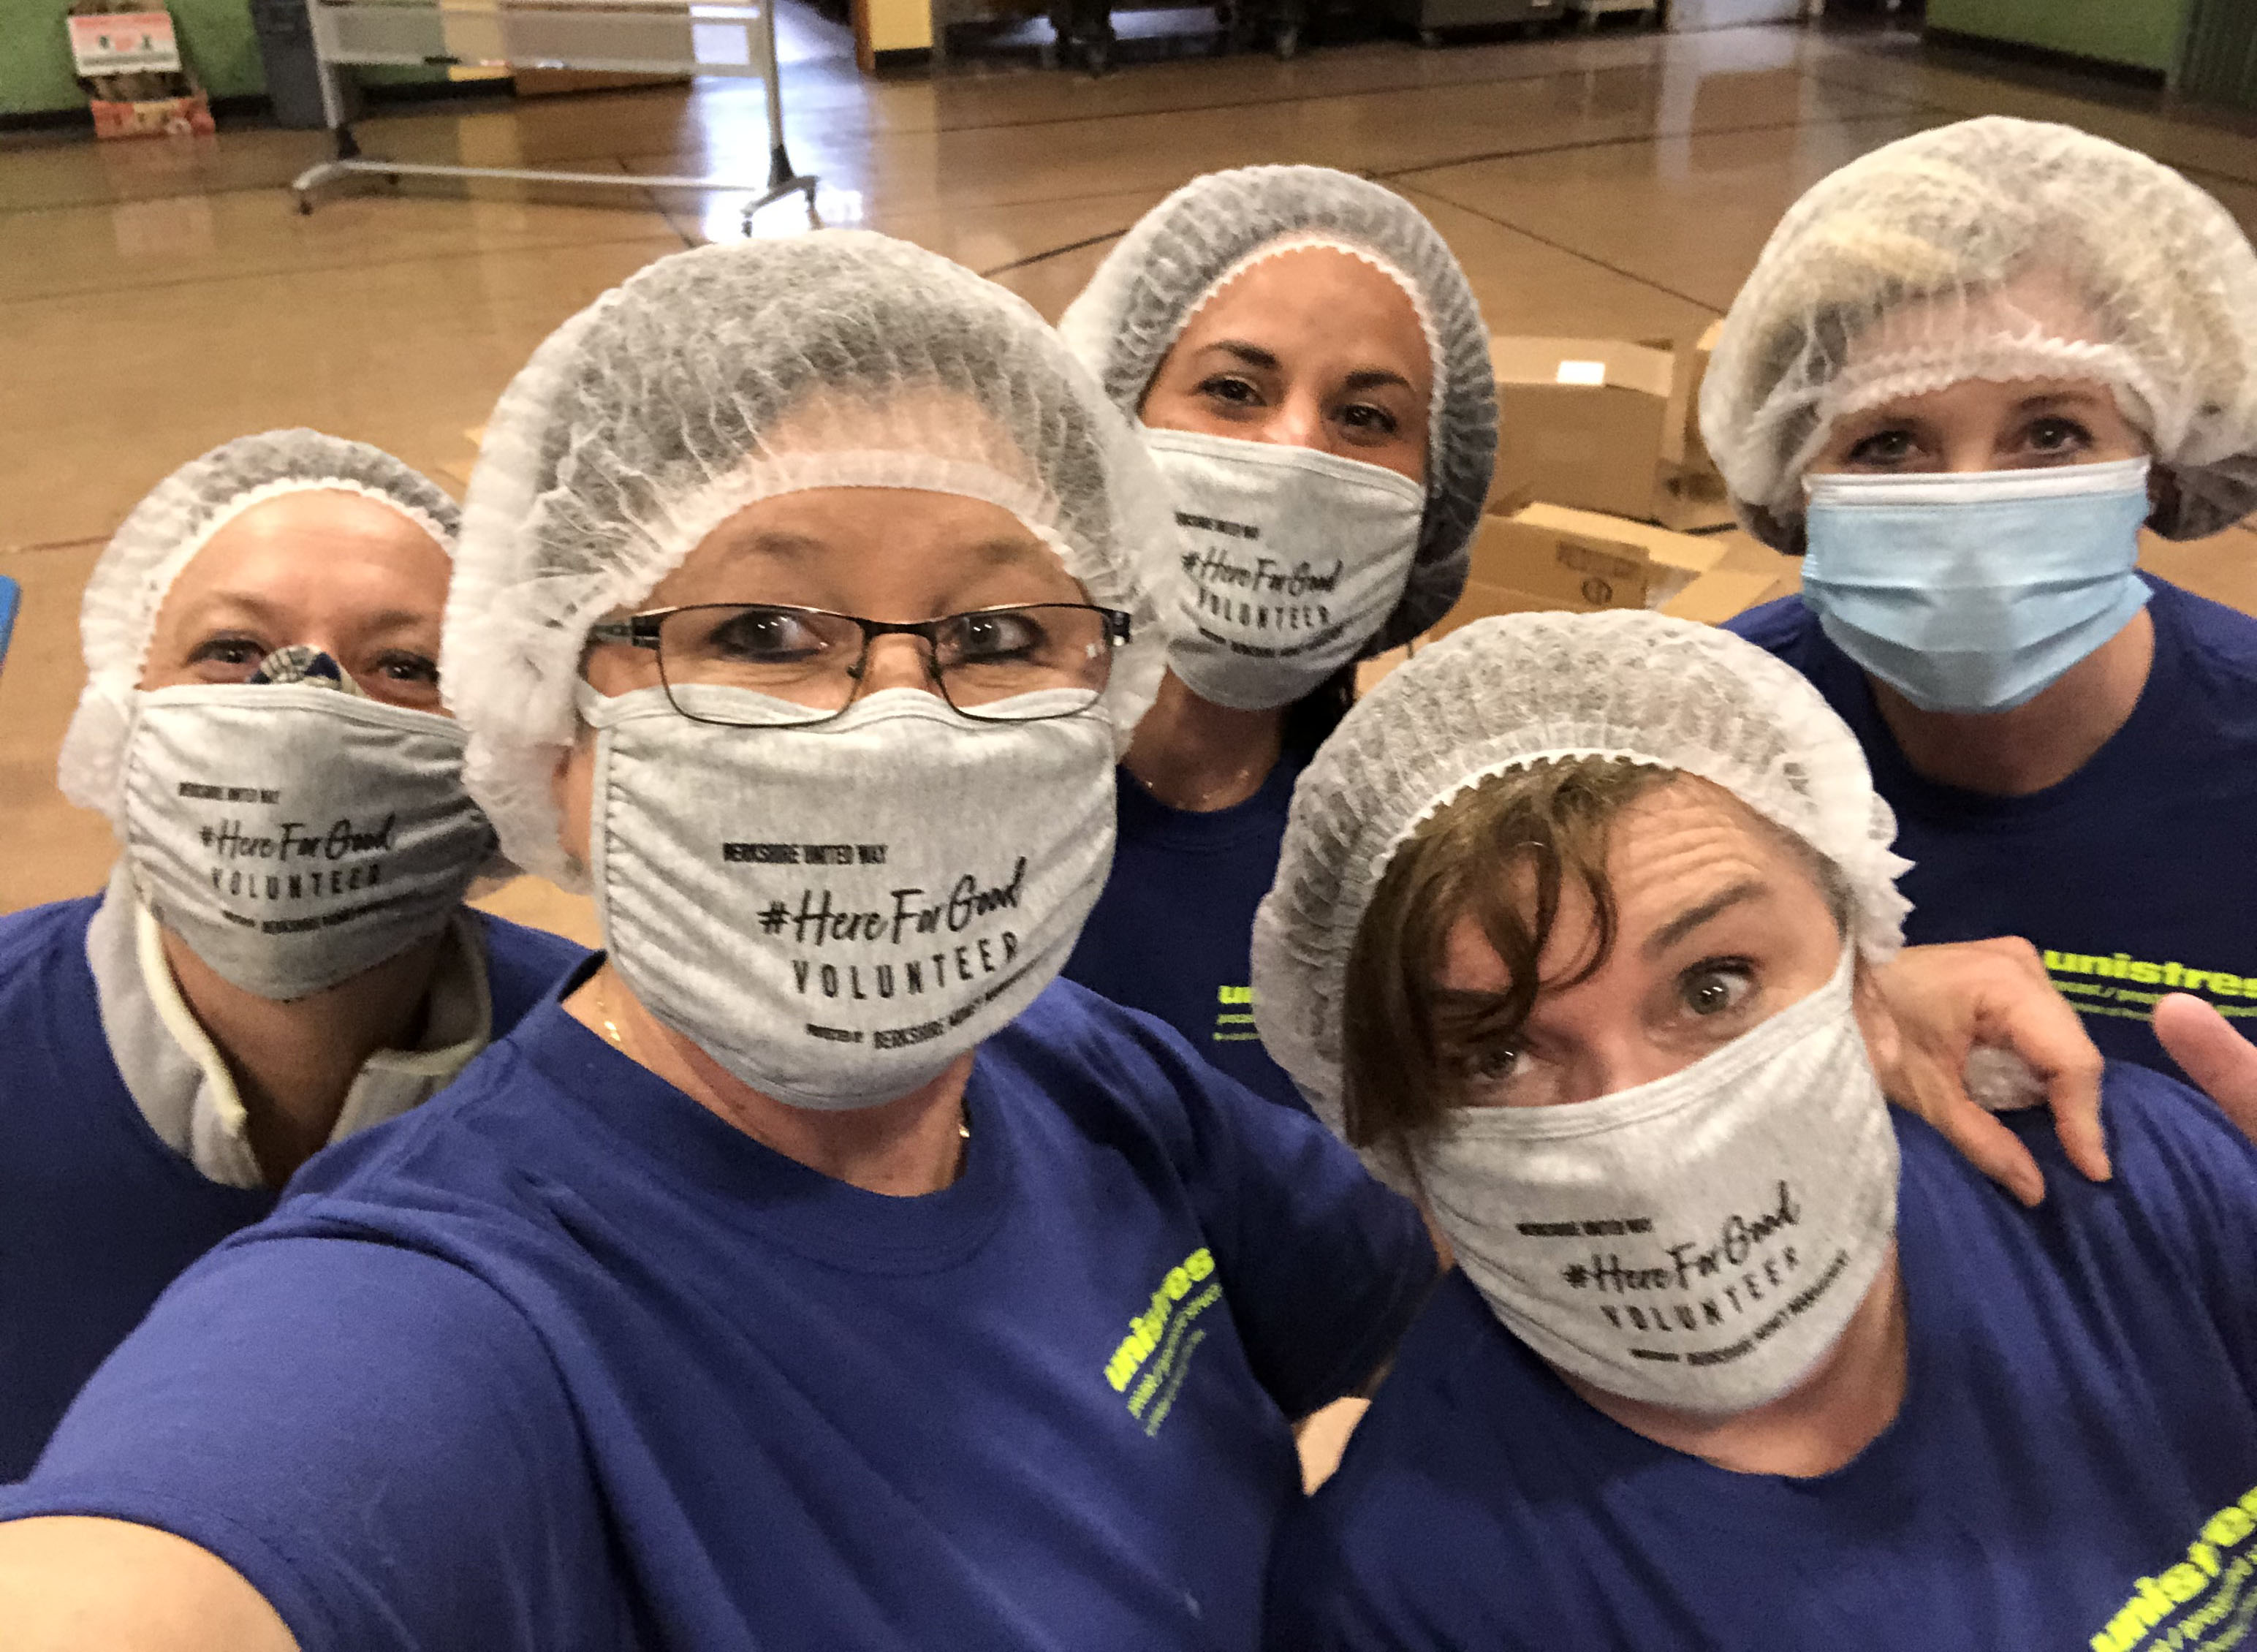 Food packing selfie, shared with BUW